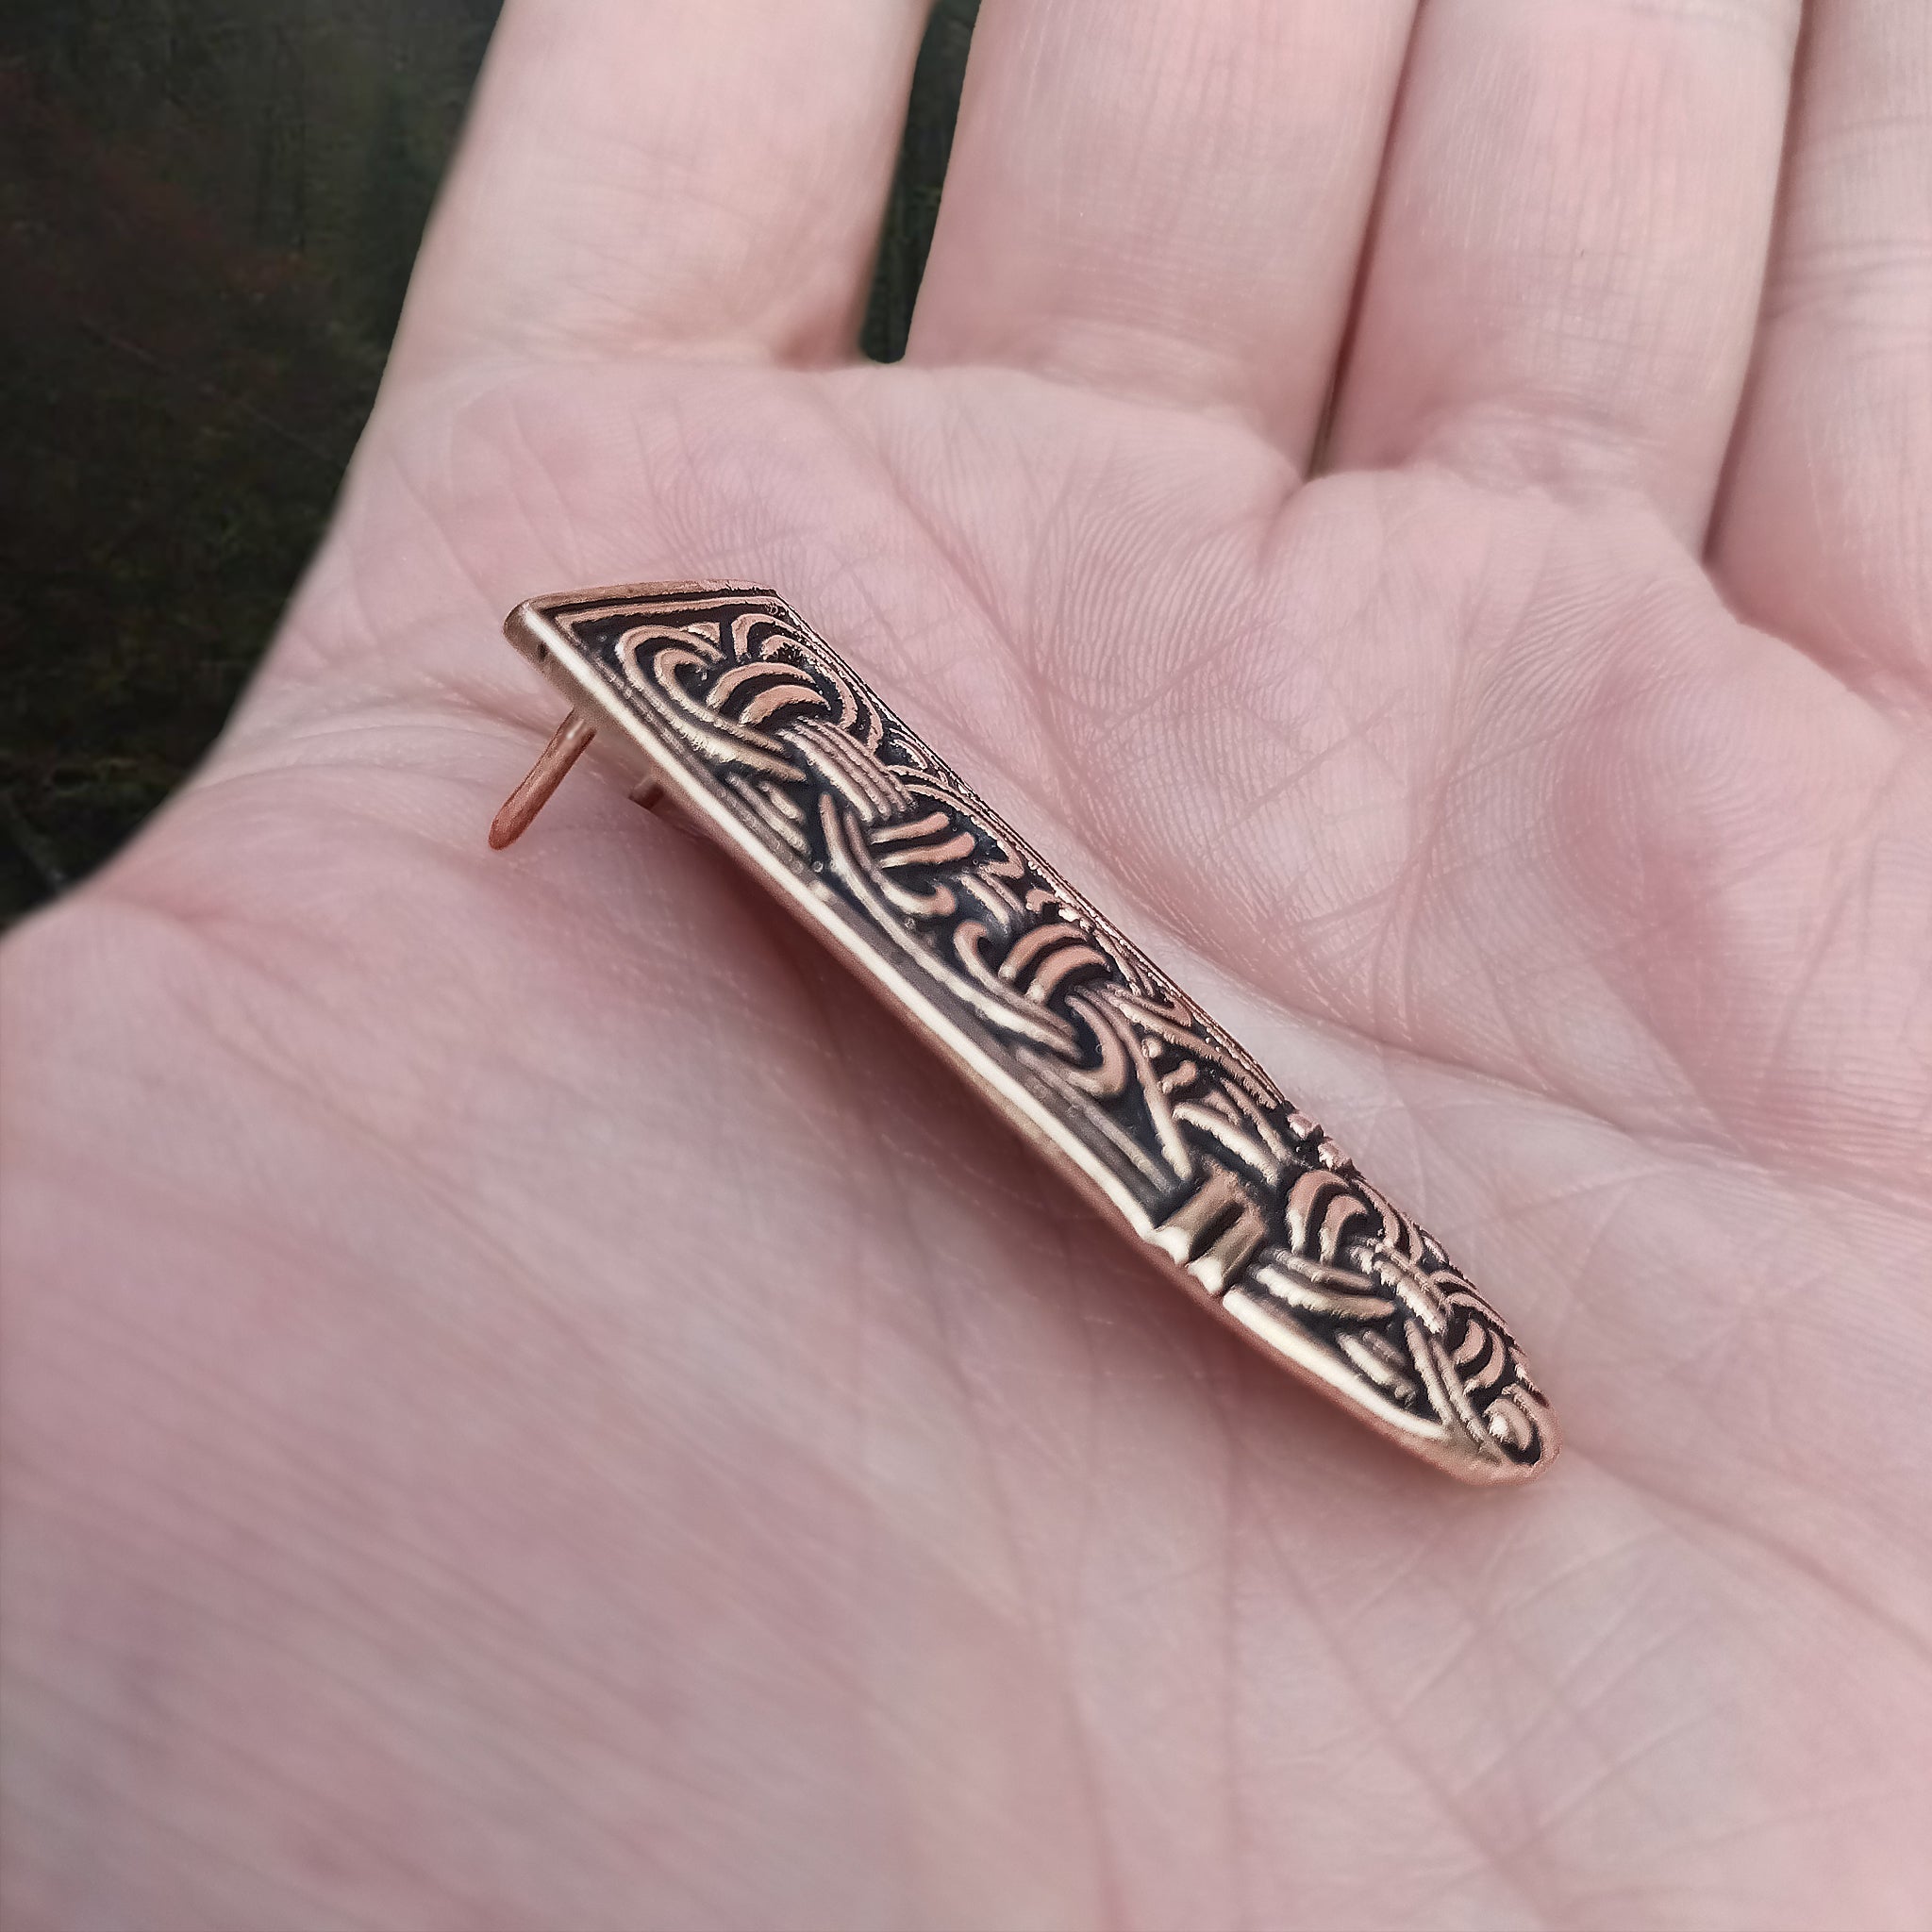 Bronze Borre Style Birka Viking Strap End on Hand - Side View